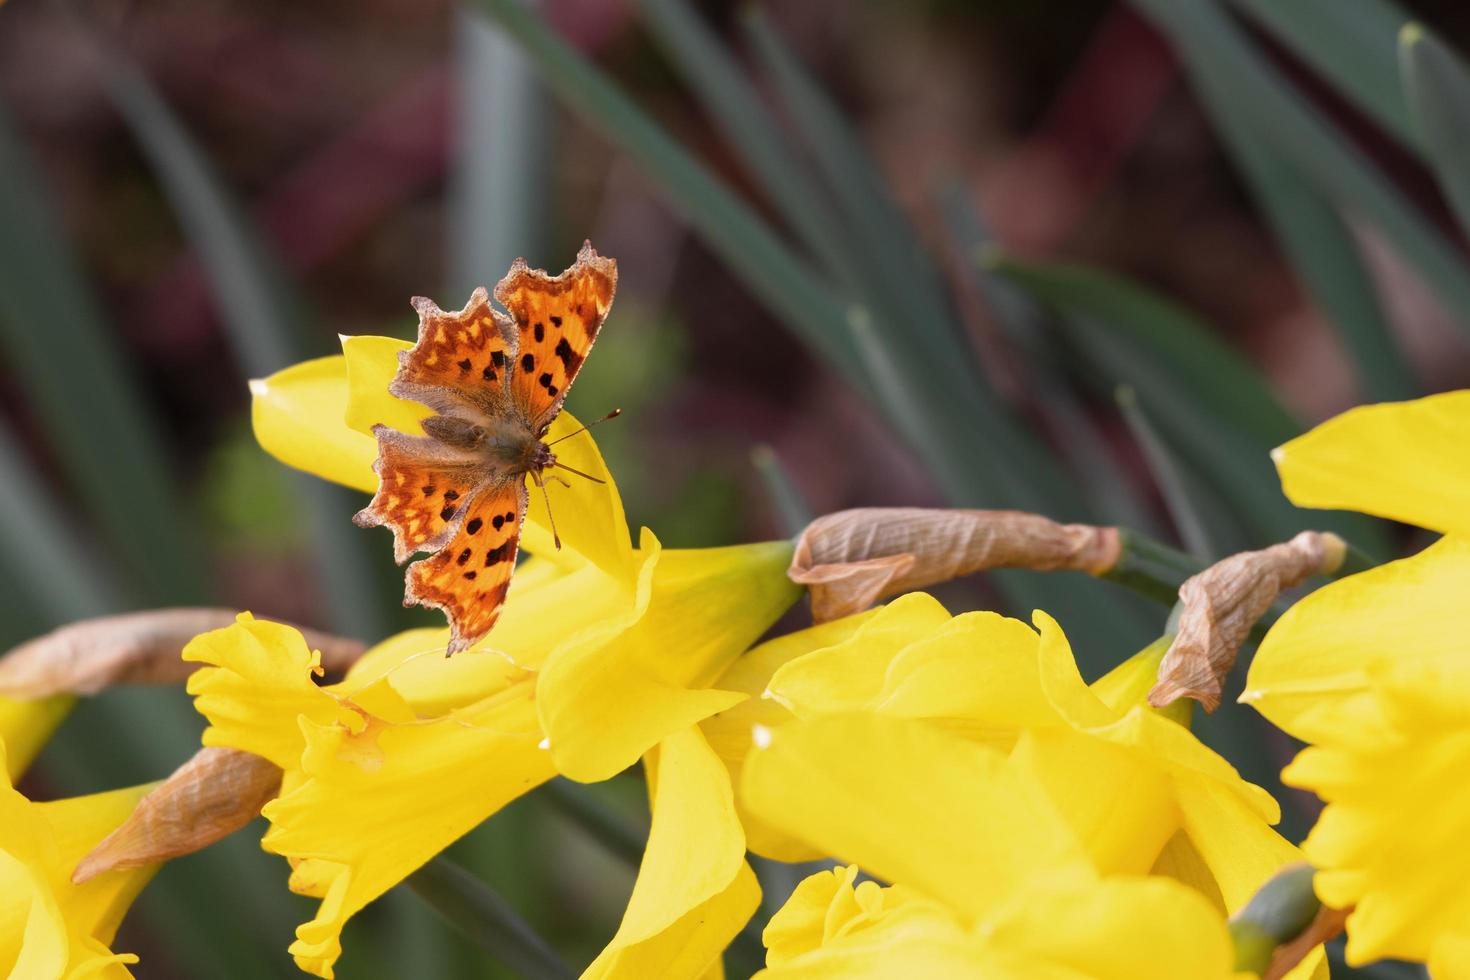 Comma Butterfly resting on a daffodil photo